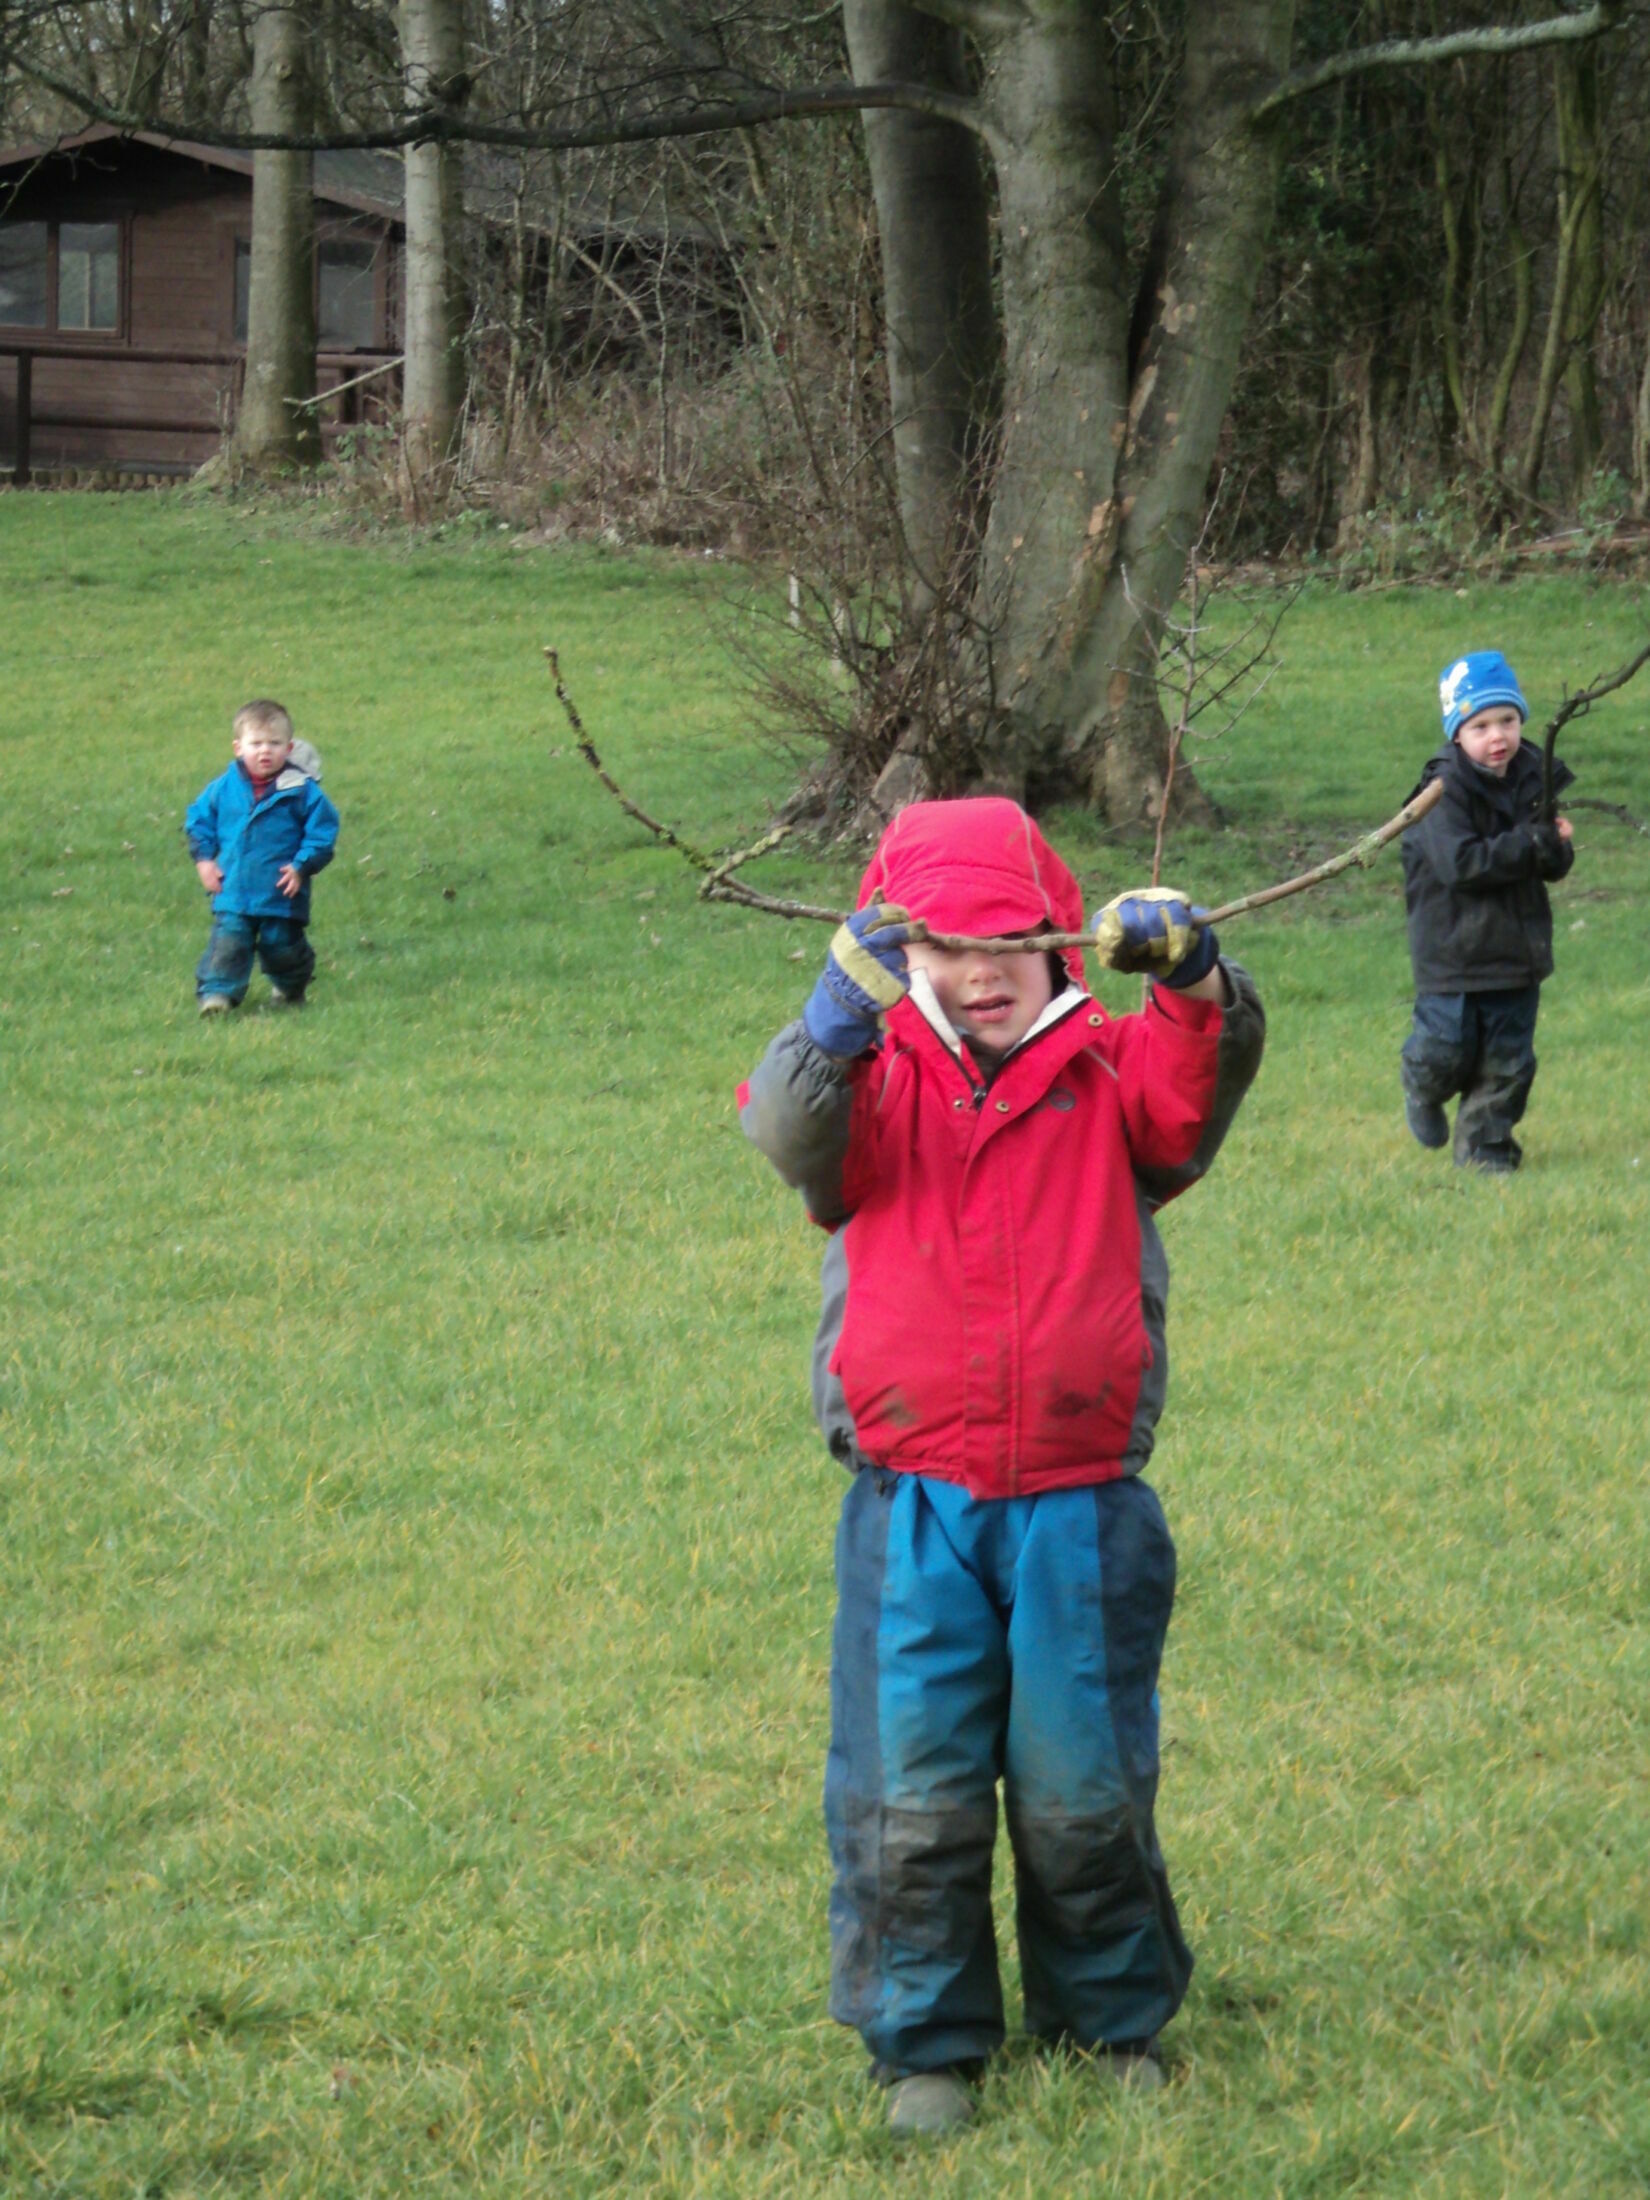 boy in red coat and blue waterproof trousers in foreground, holding up a long stick, with 2 small children also in outdoor gear, running behind